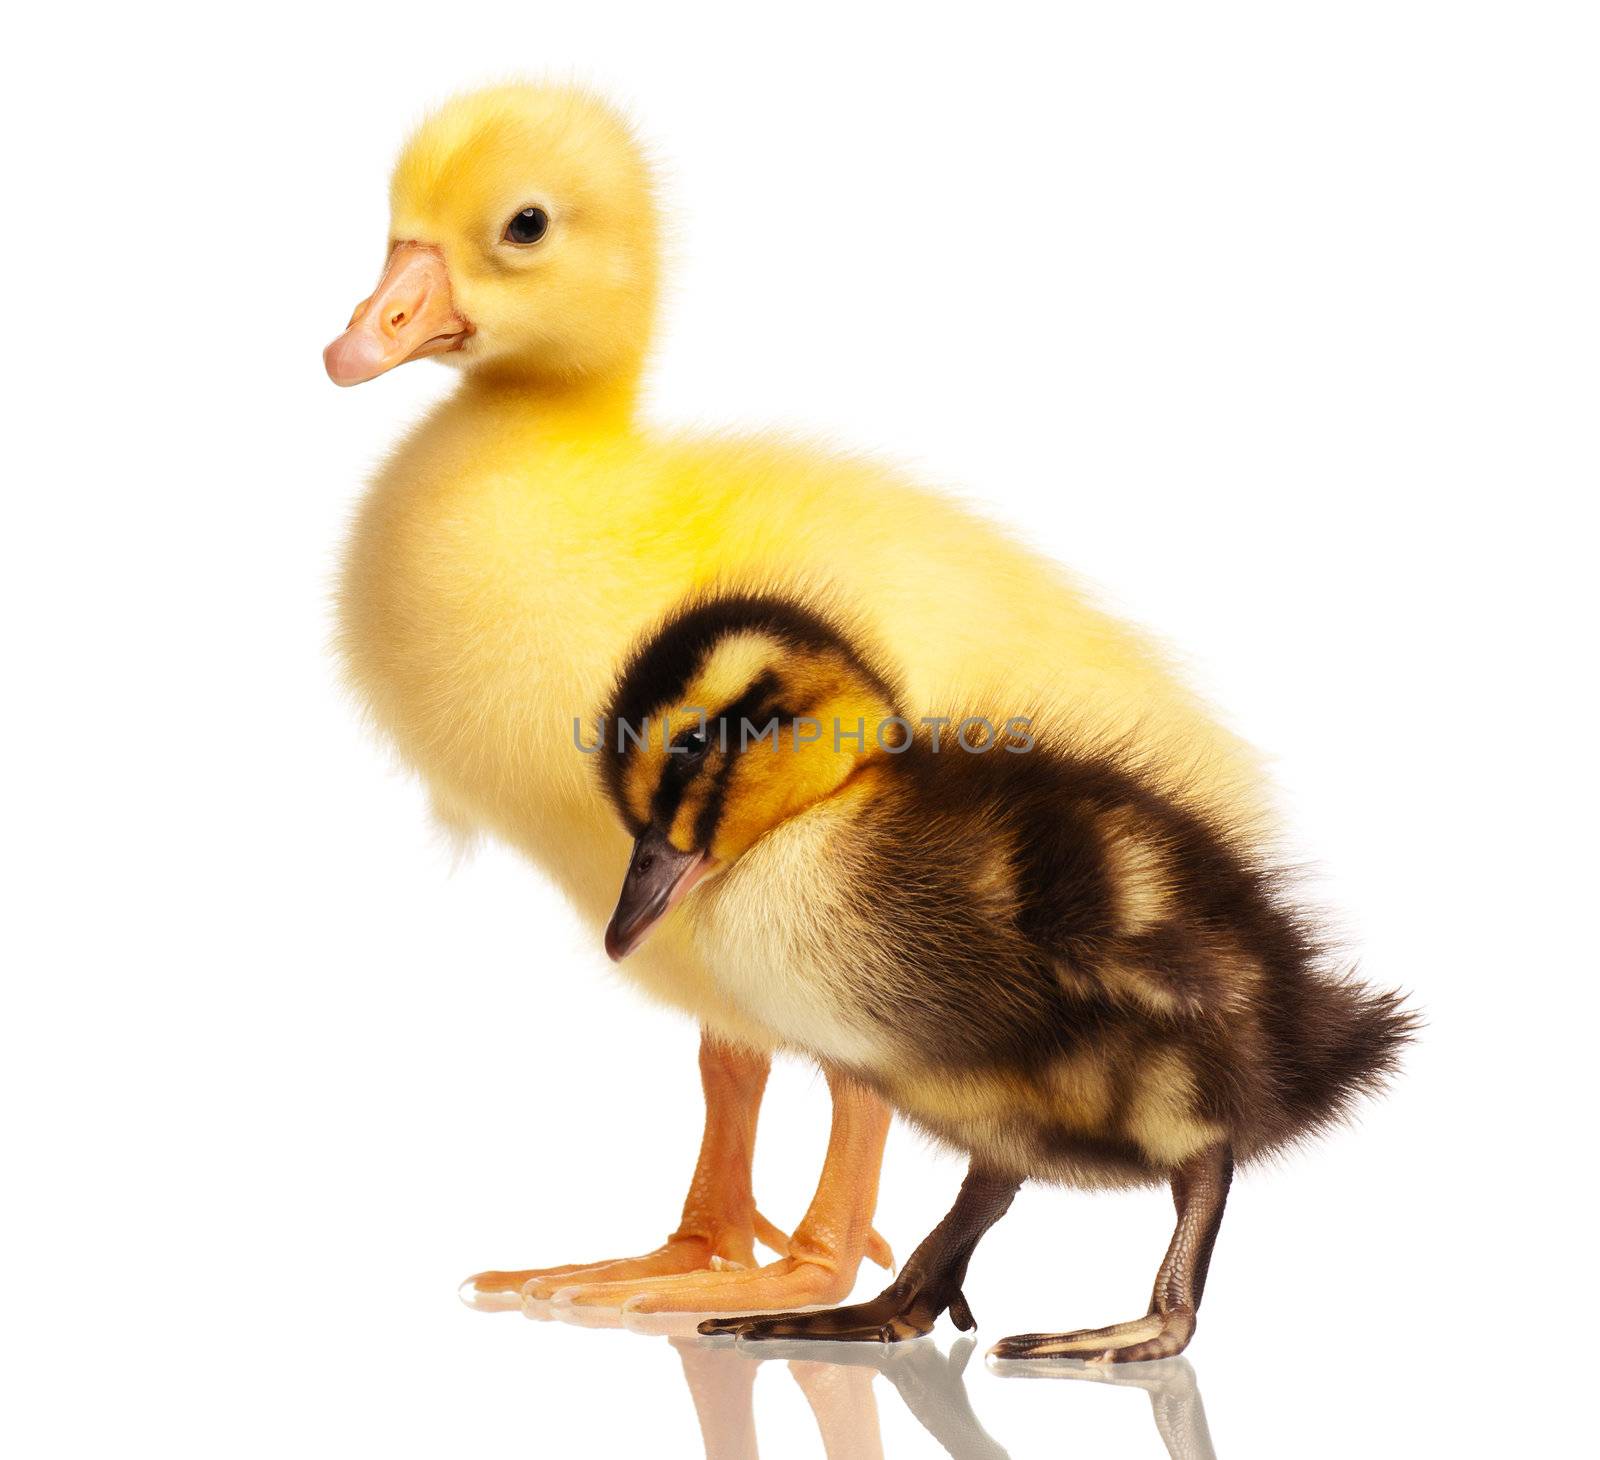 Cute domestic duckling and gosling isolated on white background